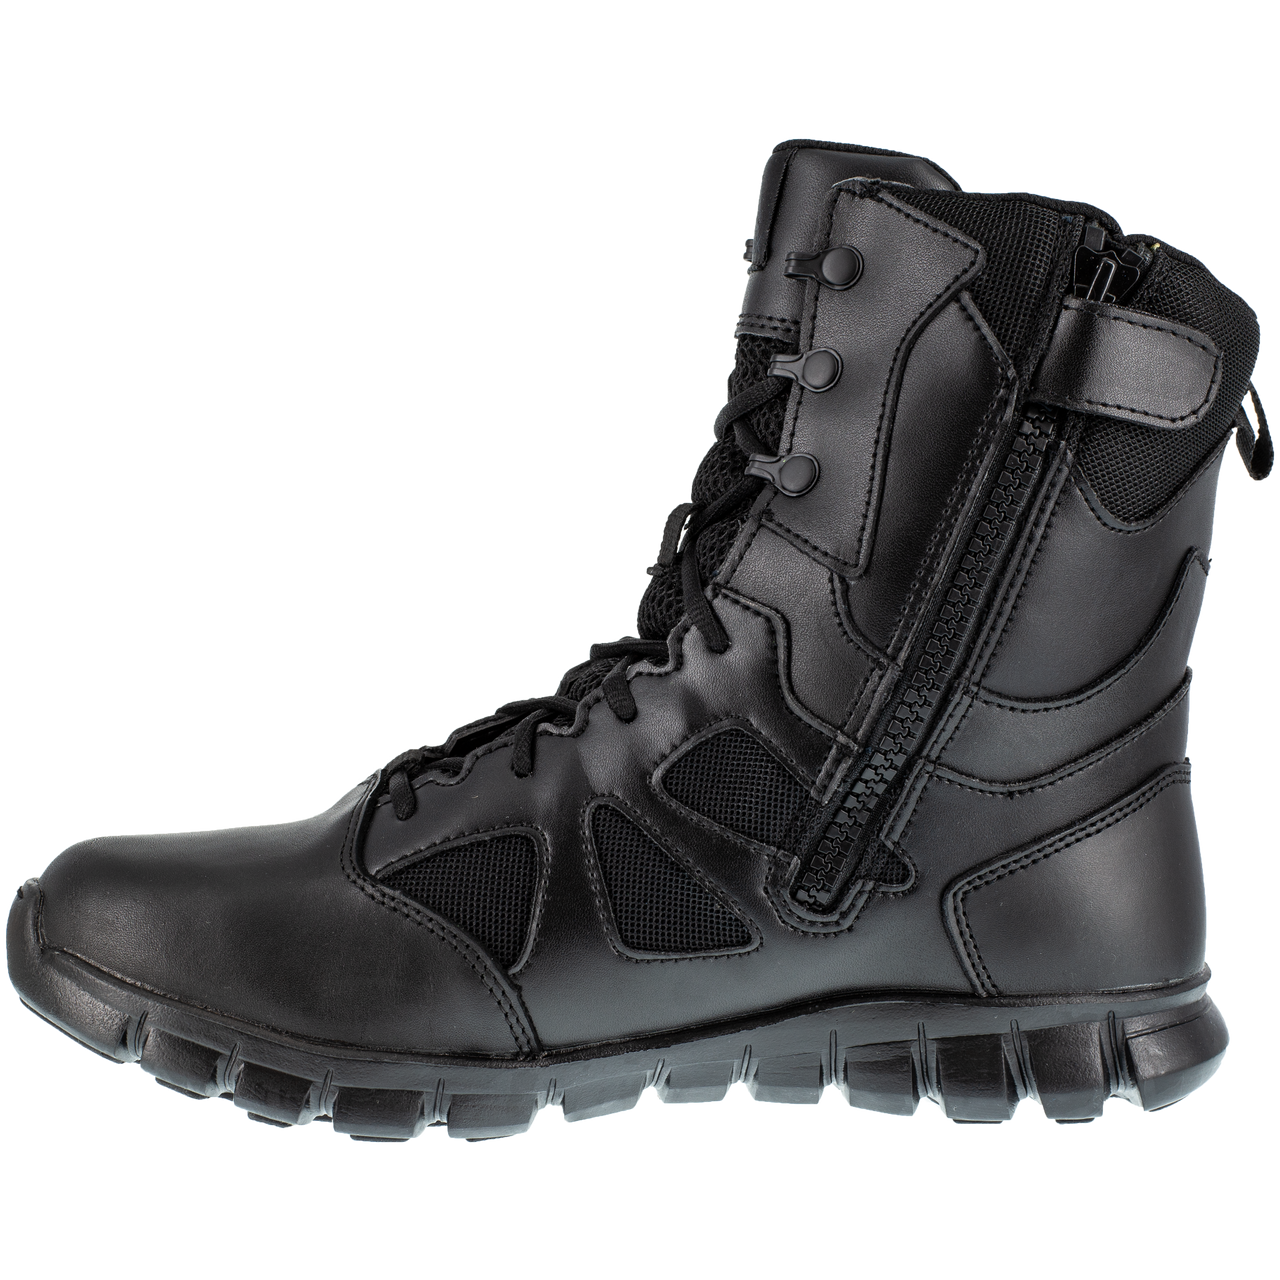 Reebok Sublite Cushion 8" Tactical Waterproof Boots with Side Zipper - RB806